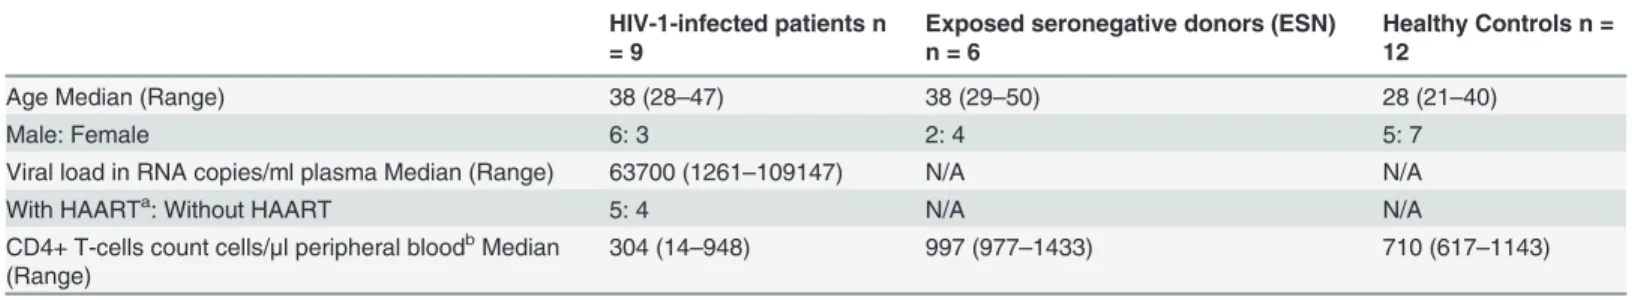 Table 1. Demographic features of HIV-1 infected patients, exposed seronegative donors and healthy controls.